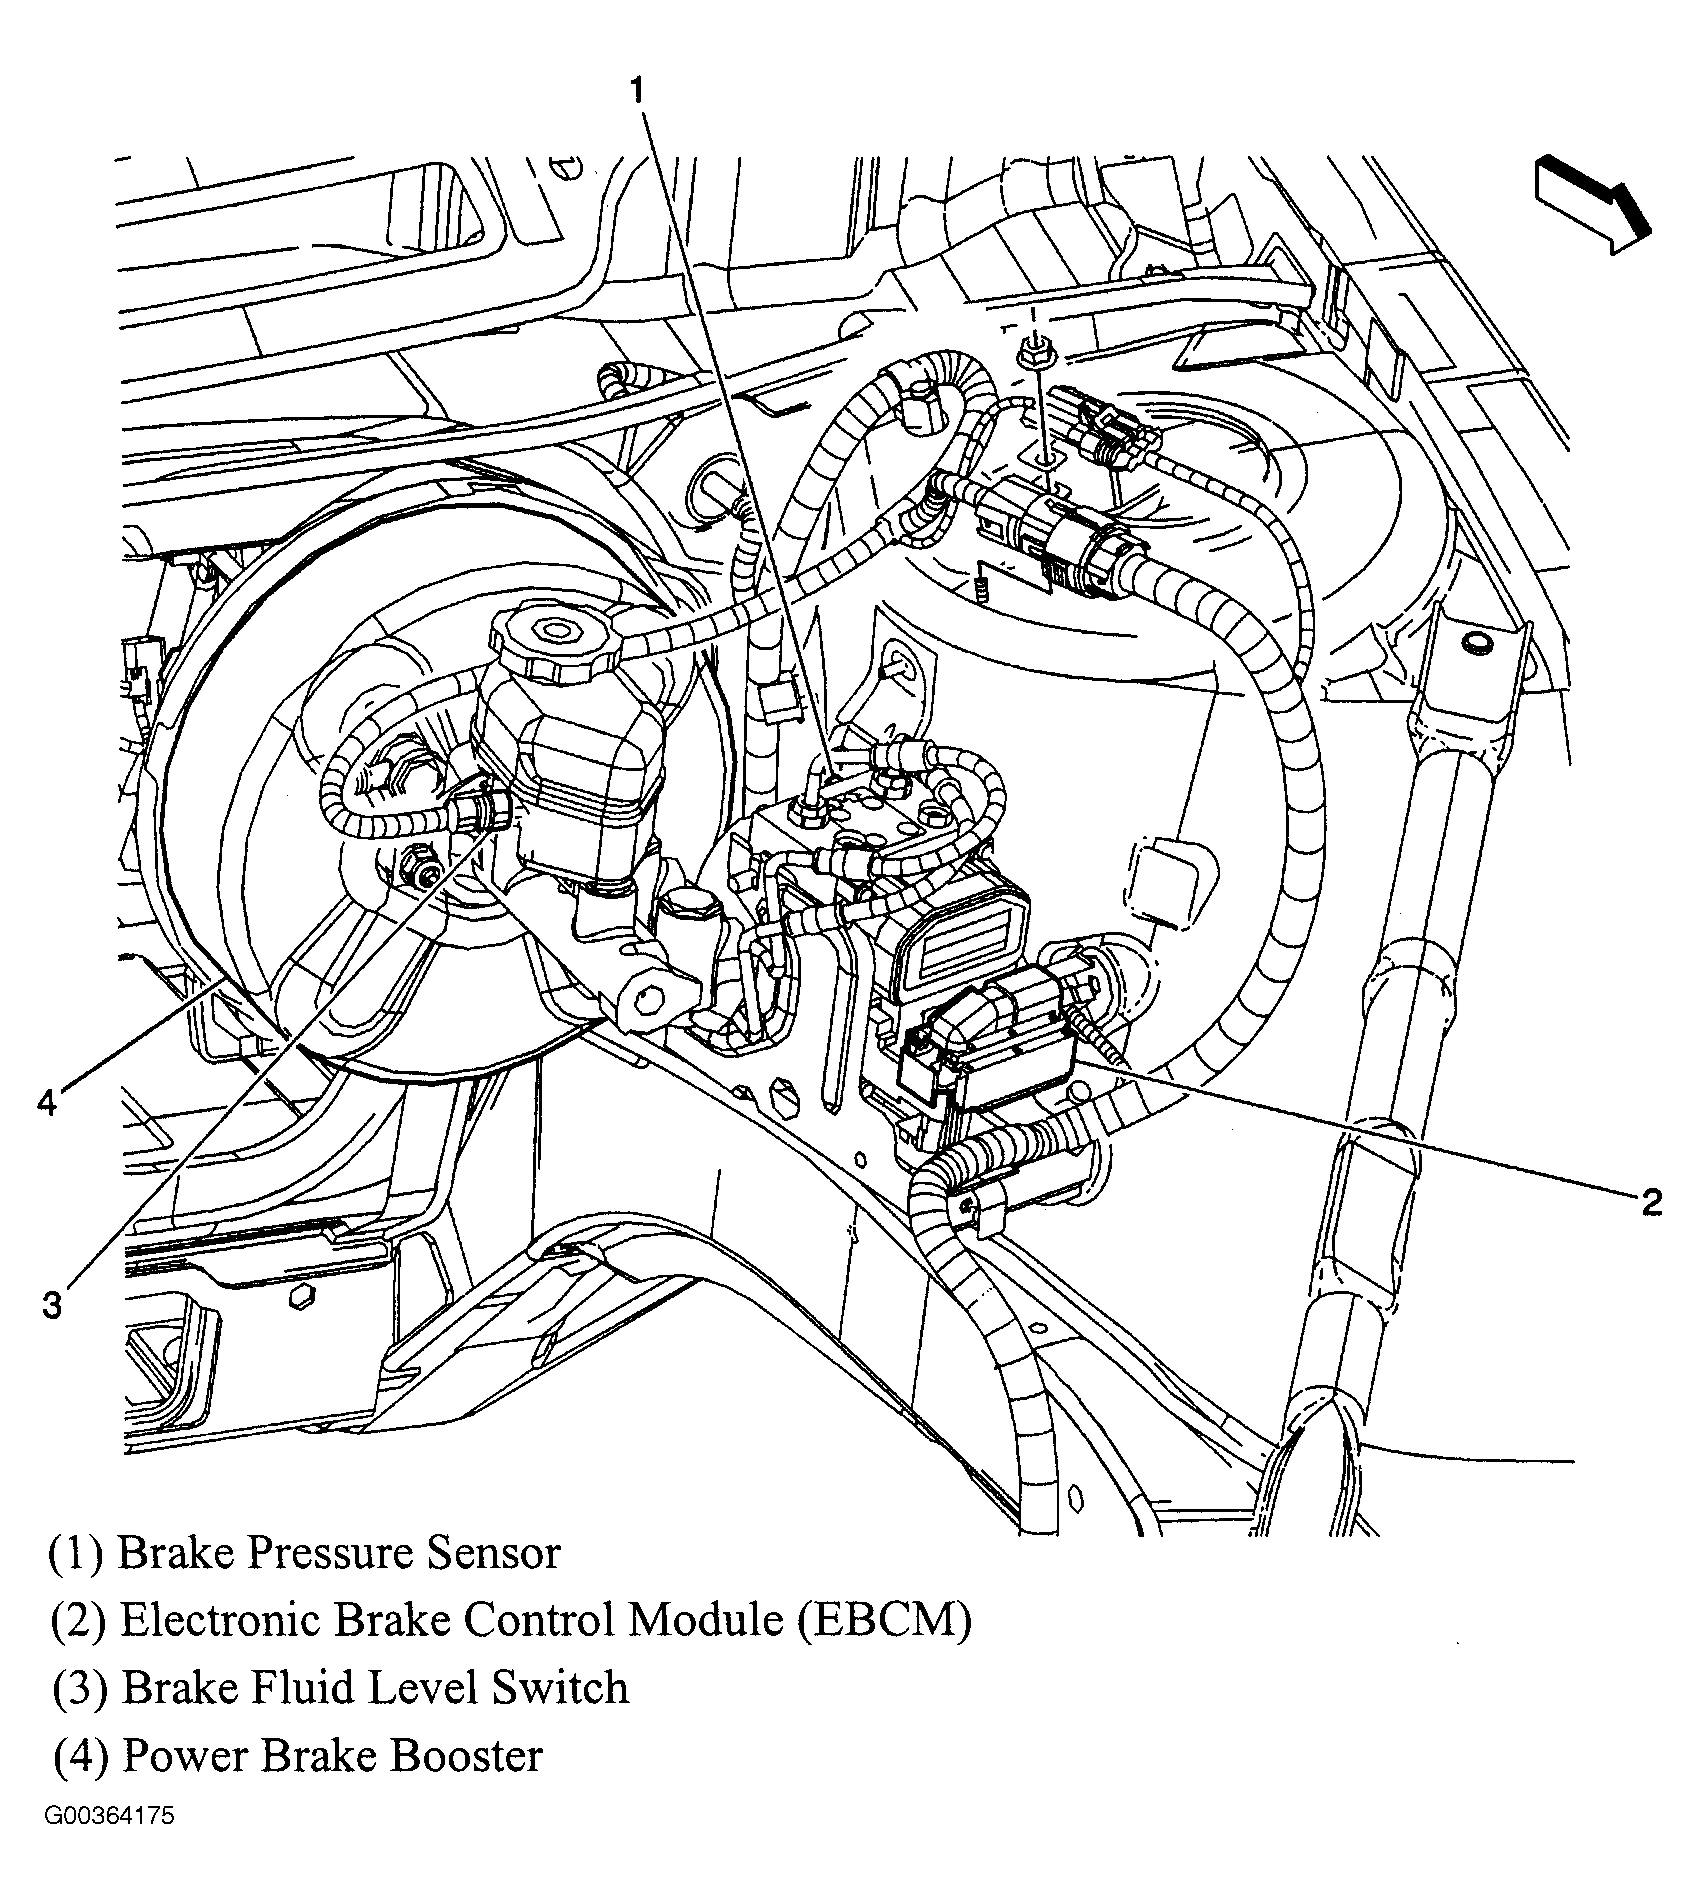 Buick LaCrosse CXL 2005 - Component Locations -  Left Rear Of Engine Compartment